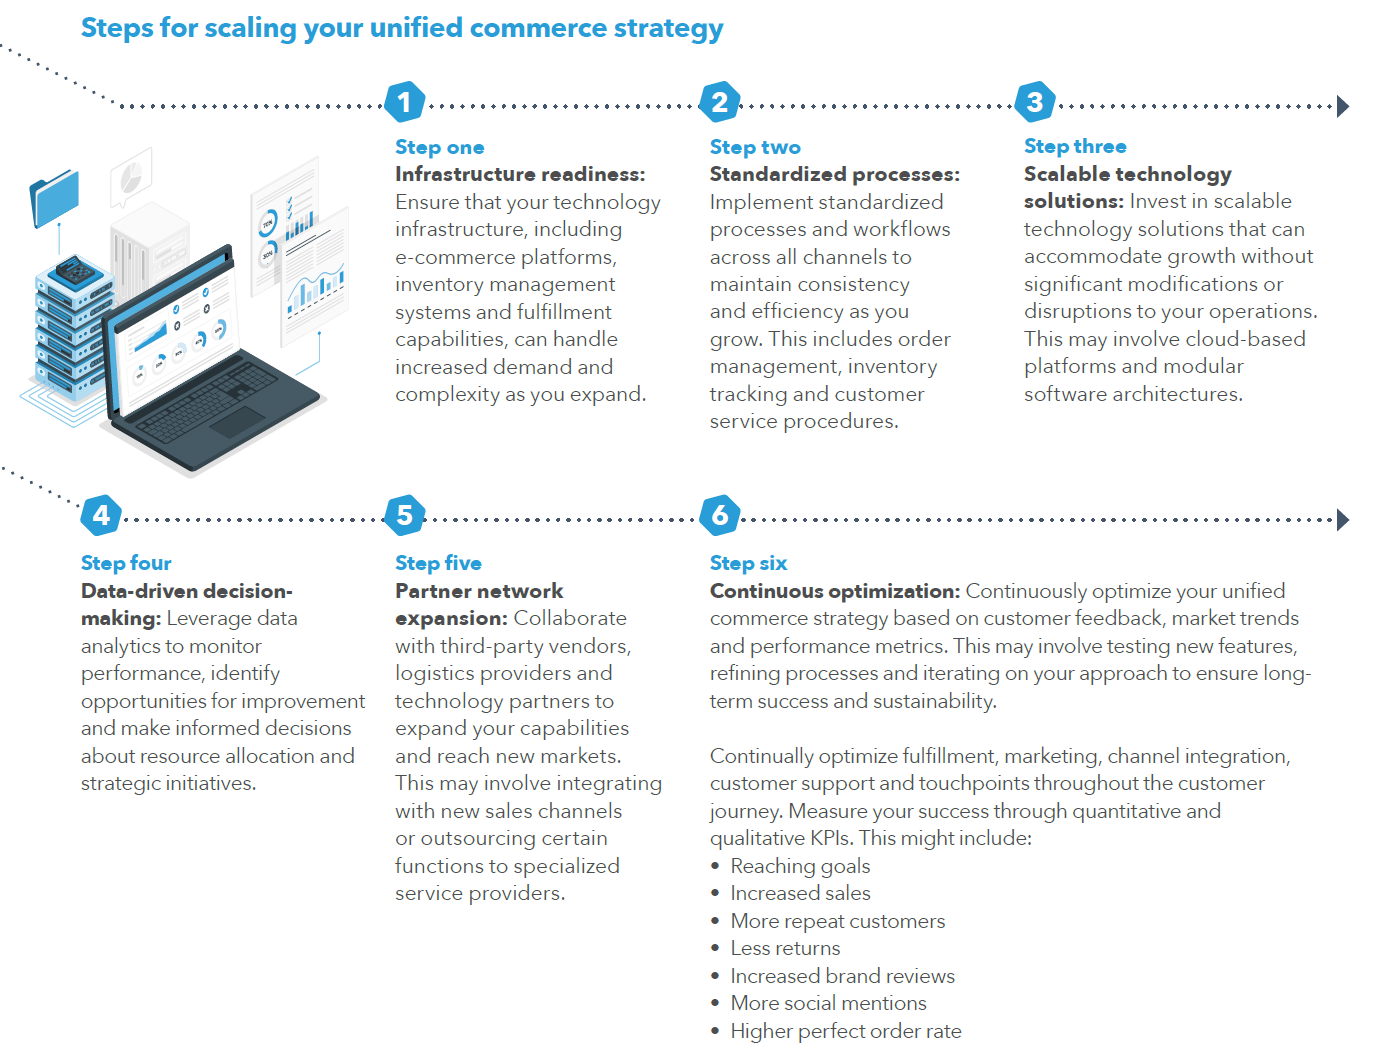 infographic outlining six steps for scaling unified commerce strategy